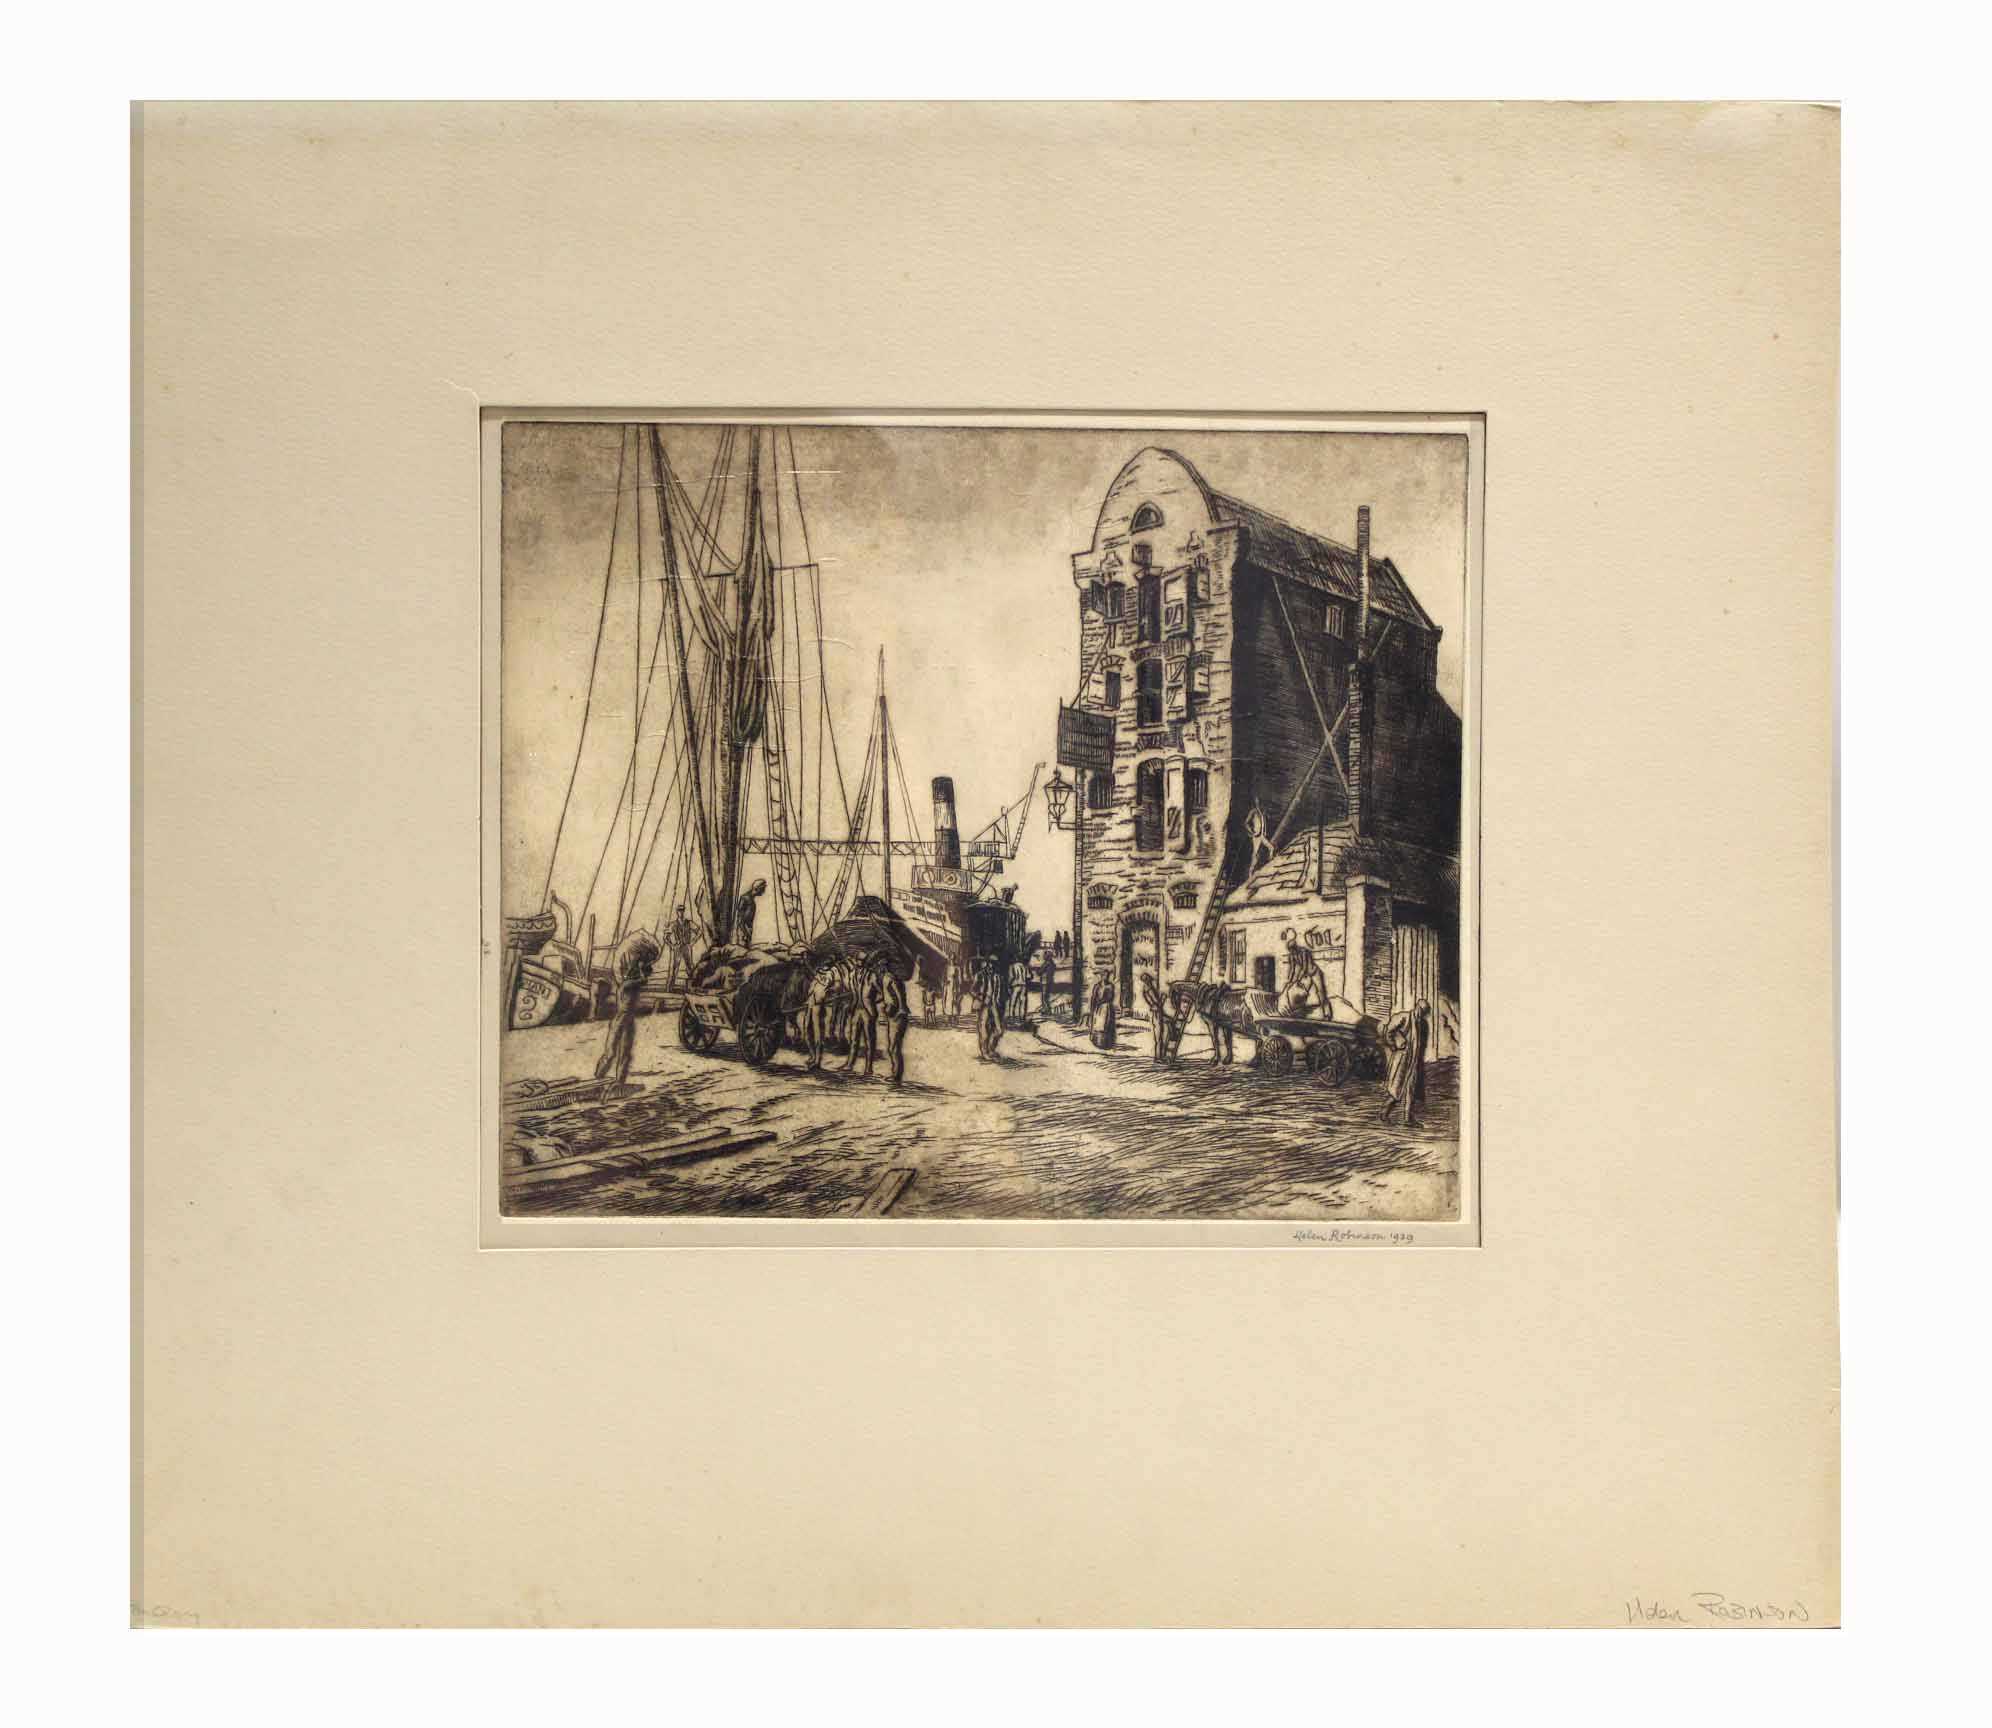 Helen Robinson (20TH CENTURY) Harbour Scene, black and white etching, signed and dated 1929 in